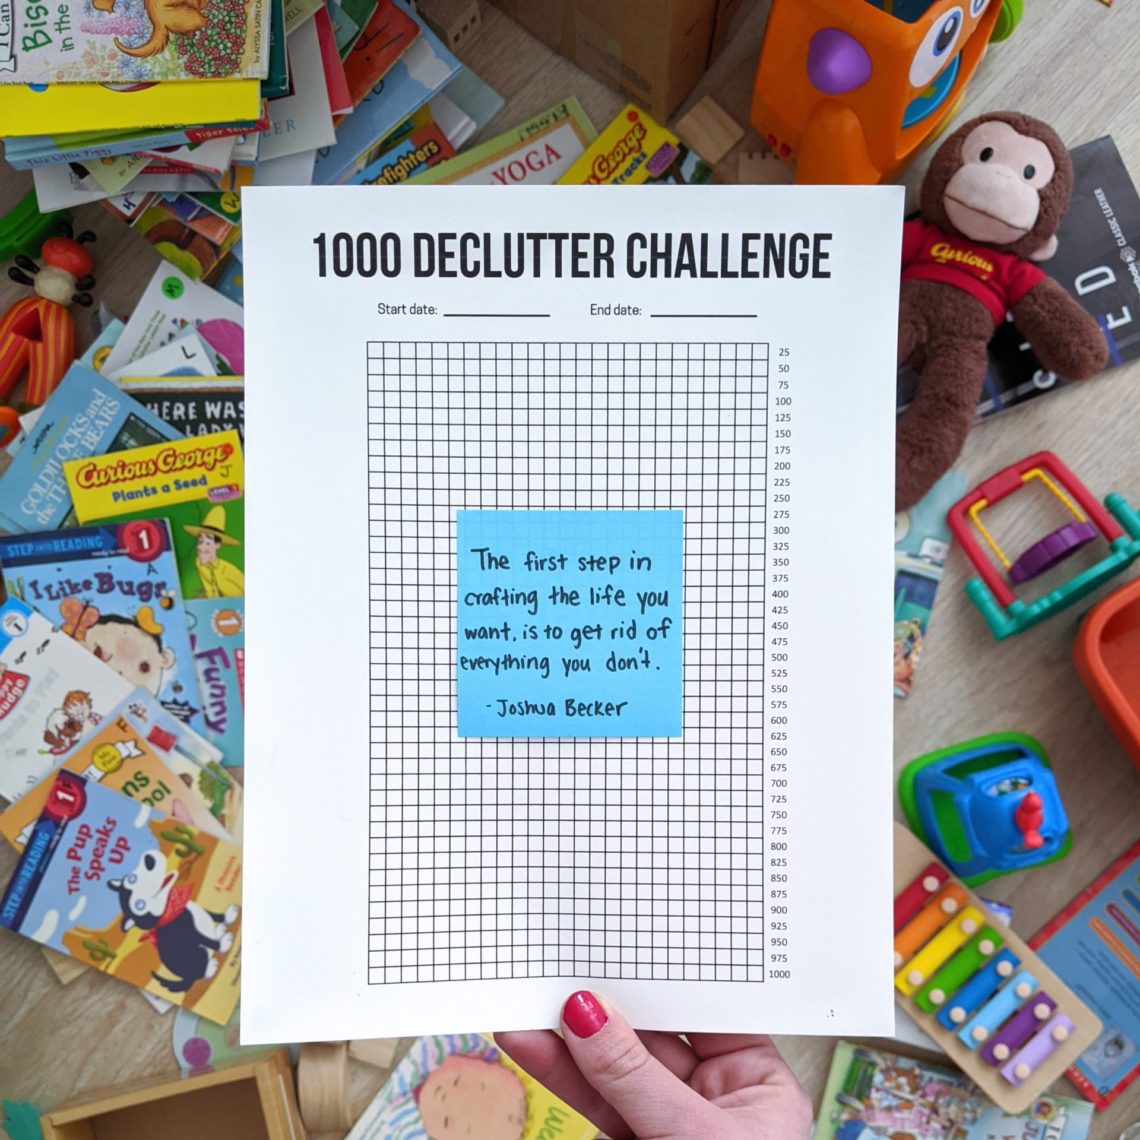 1000 declutter challenge- like an extreme version of the #minsgame, but with less rules! Declutter your home once and for all with this minimalism challenge! #minimalismgame #decluttering #mariekondo #sparkjoy